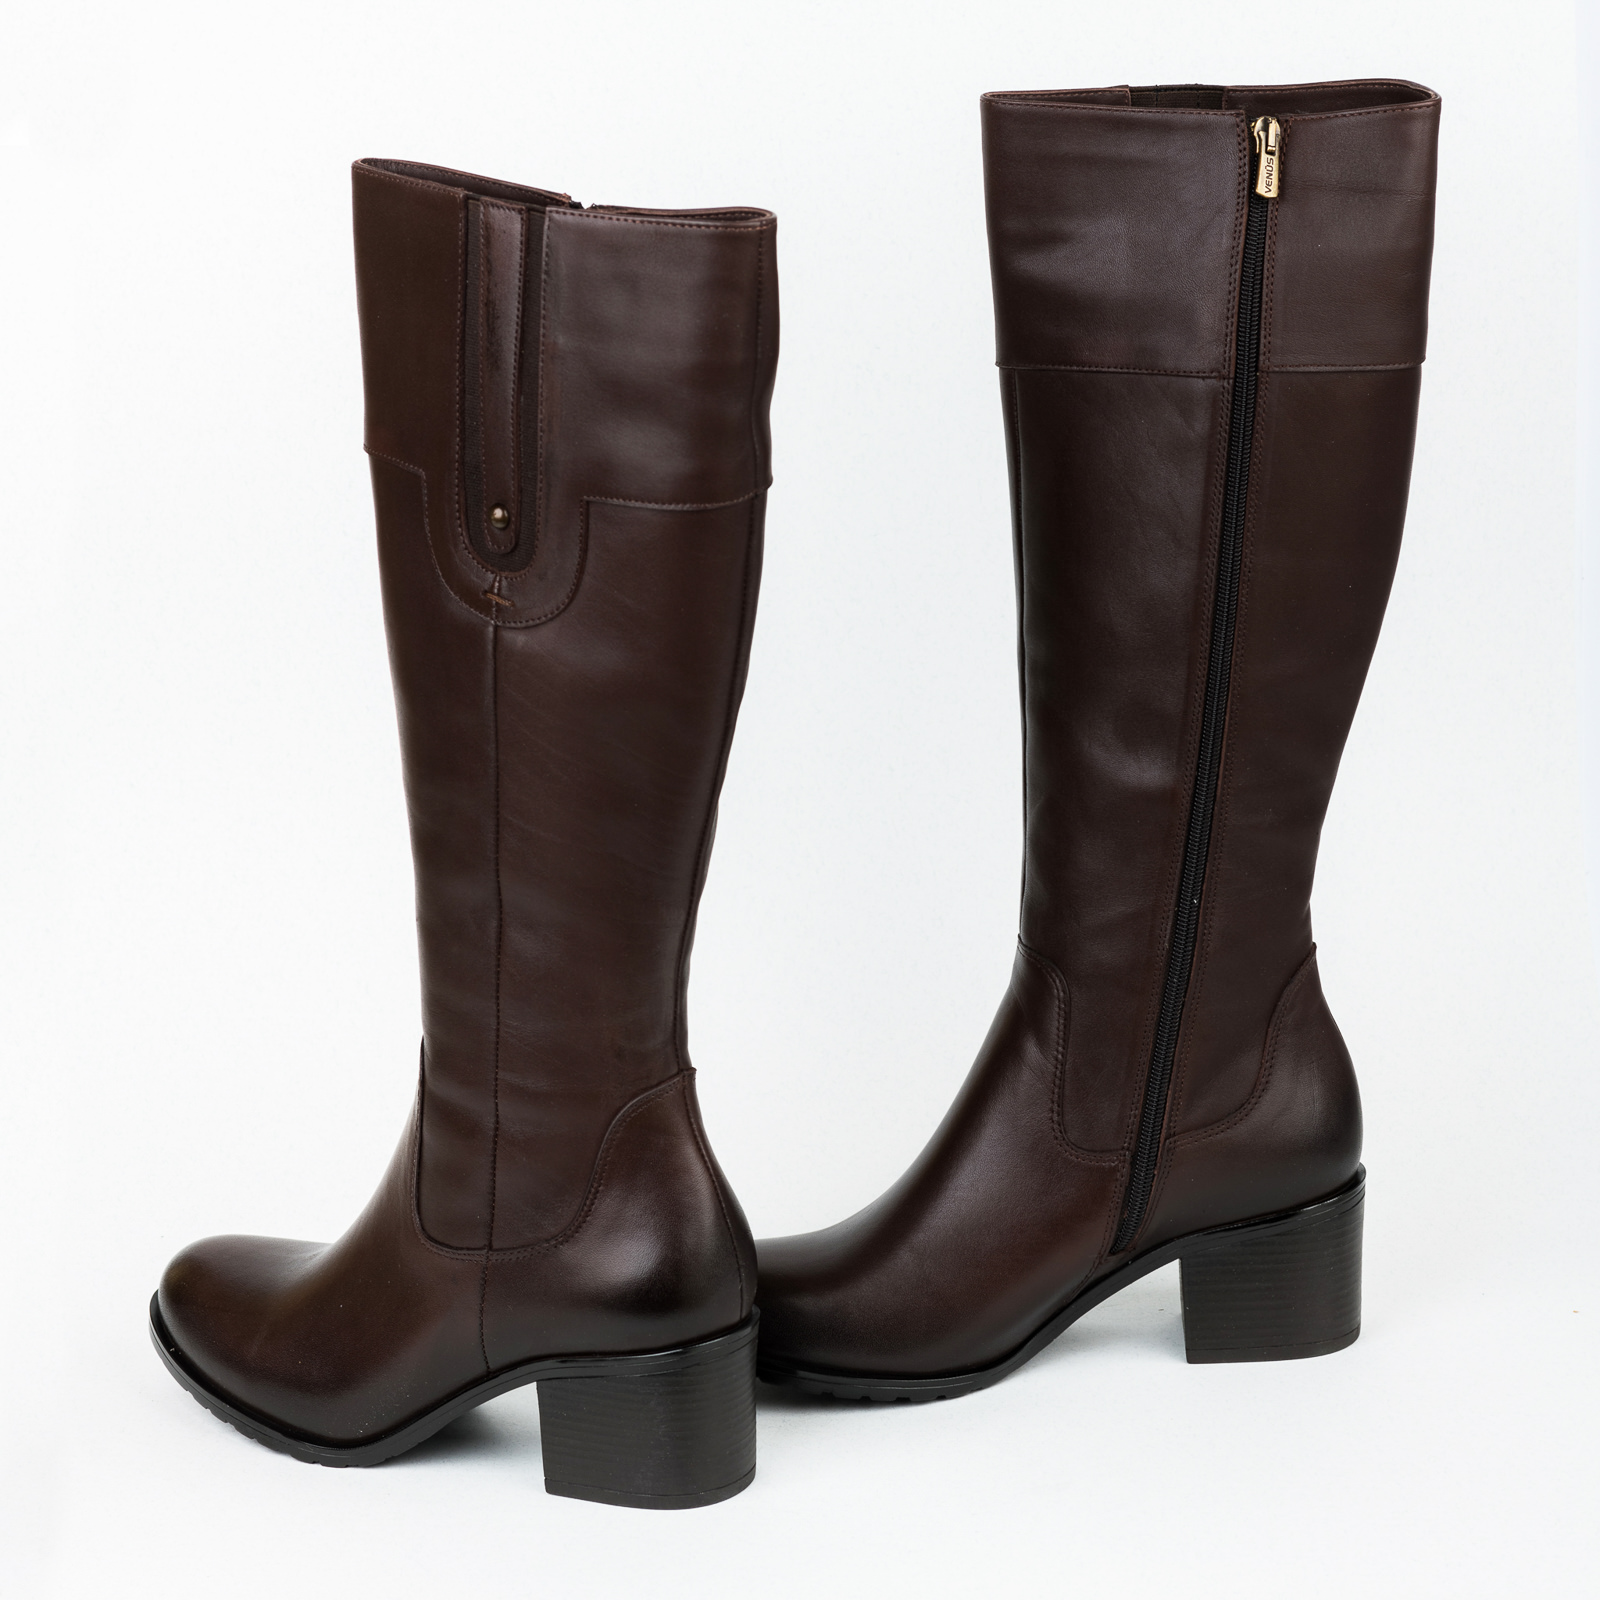 Leather boots B148 - BROWN